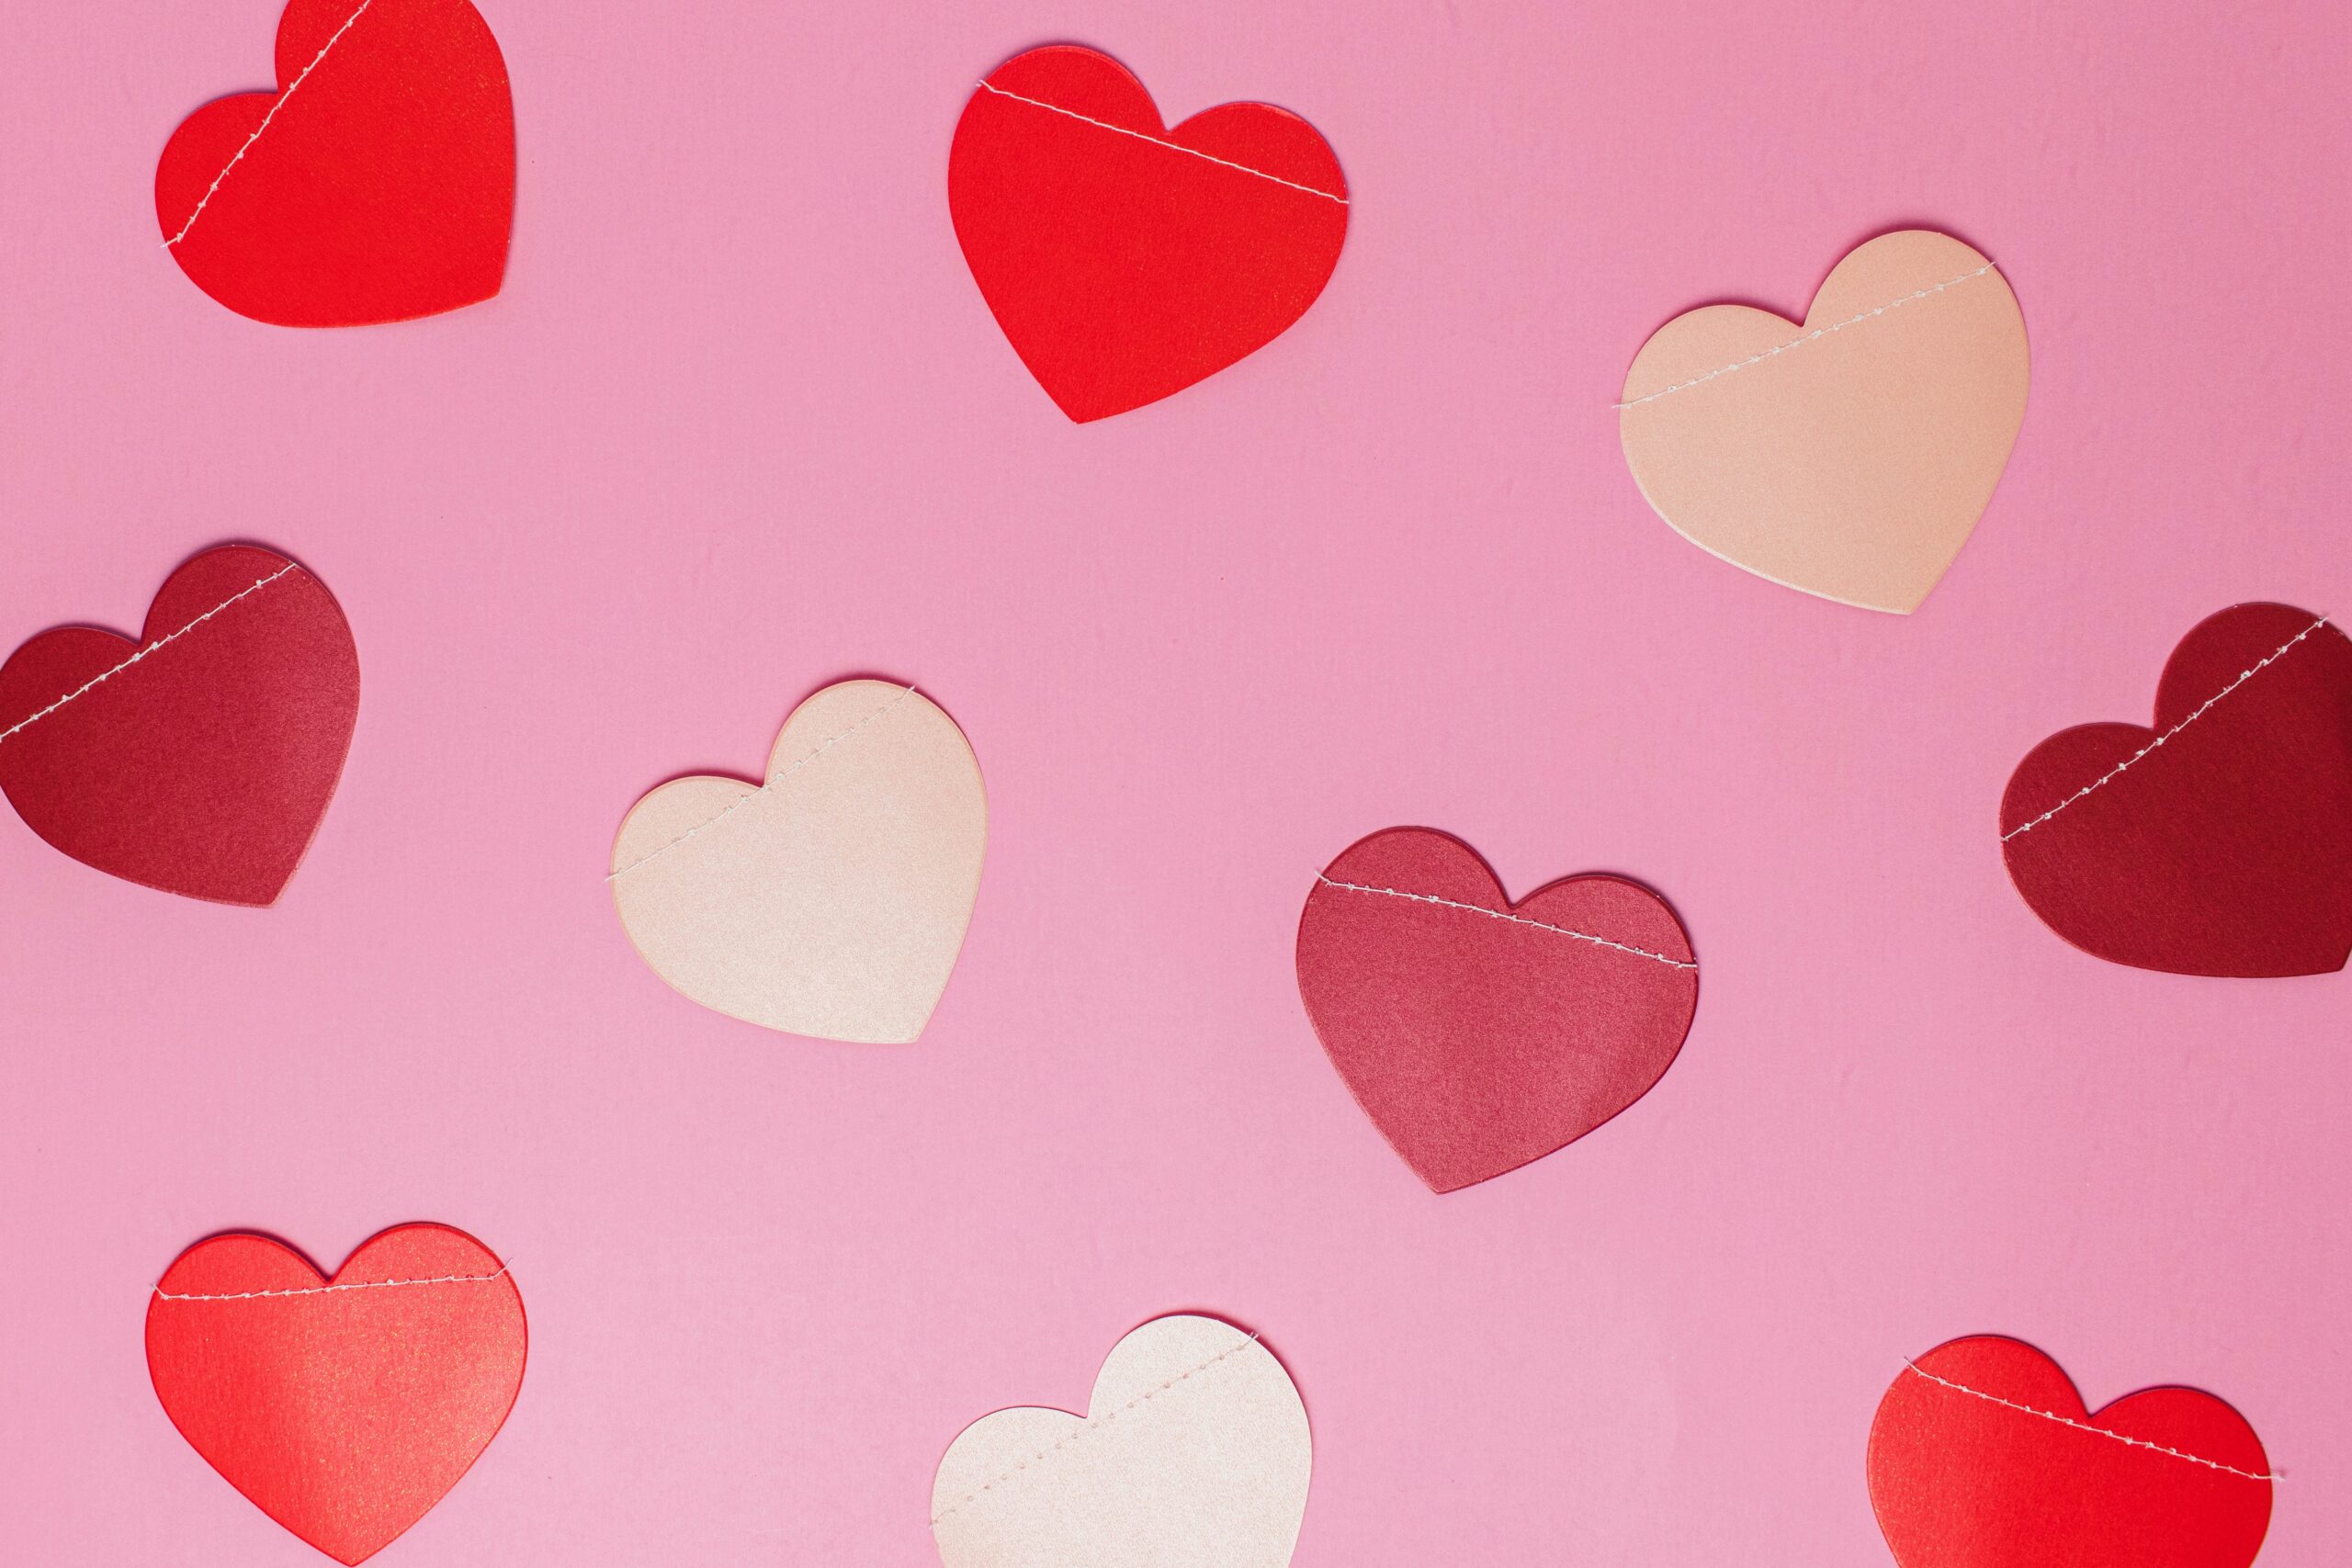 Healthy Valentine’s Day Gift Ideas: Beyond Chocolates and Flowers